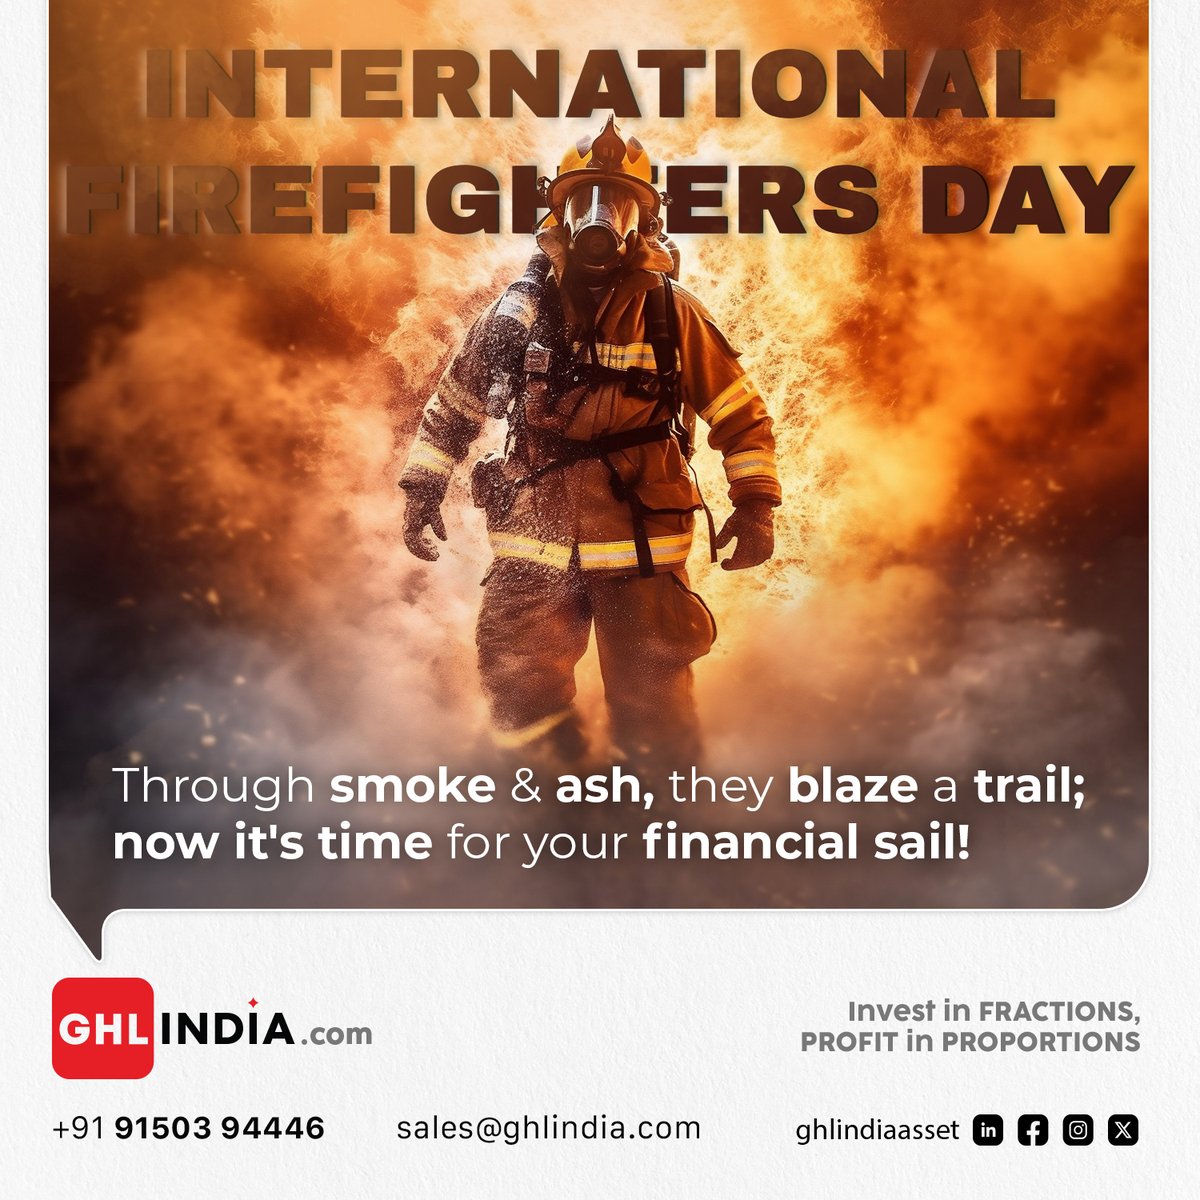 Saluting the Brave Hearts! On Firefighters Day🎉

#investment #InvestSmart #investor #Invest #IncomeOpportunity #incomestreams #passiveincome #passiveincomeideas #passiveincomeonline #wealthbuilding #wealthcreation #wealthmanagement #wealth #ReturnOnInvestment #FirefightersDay